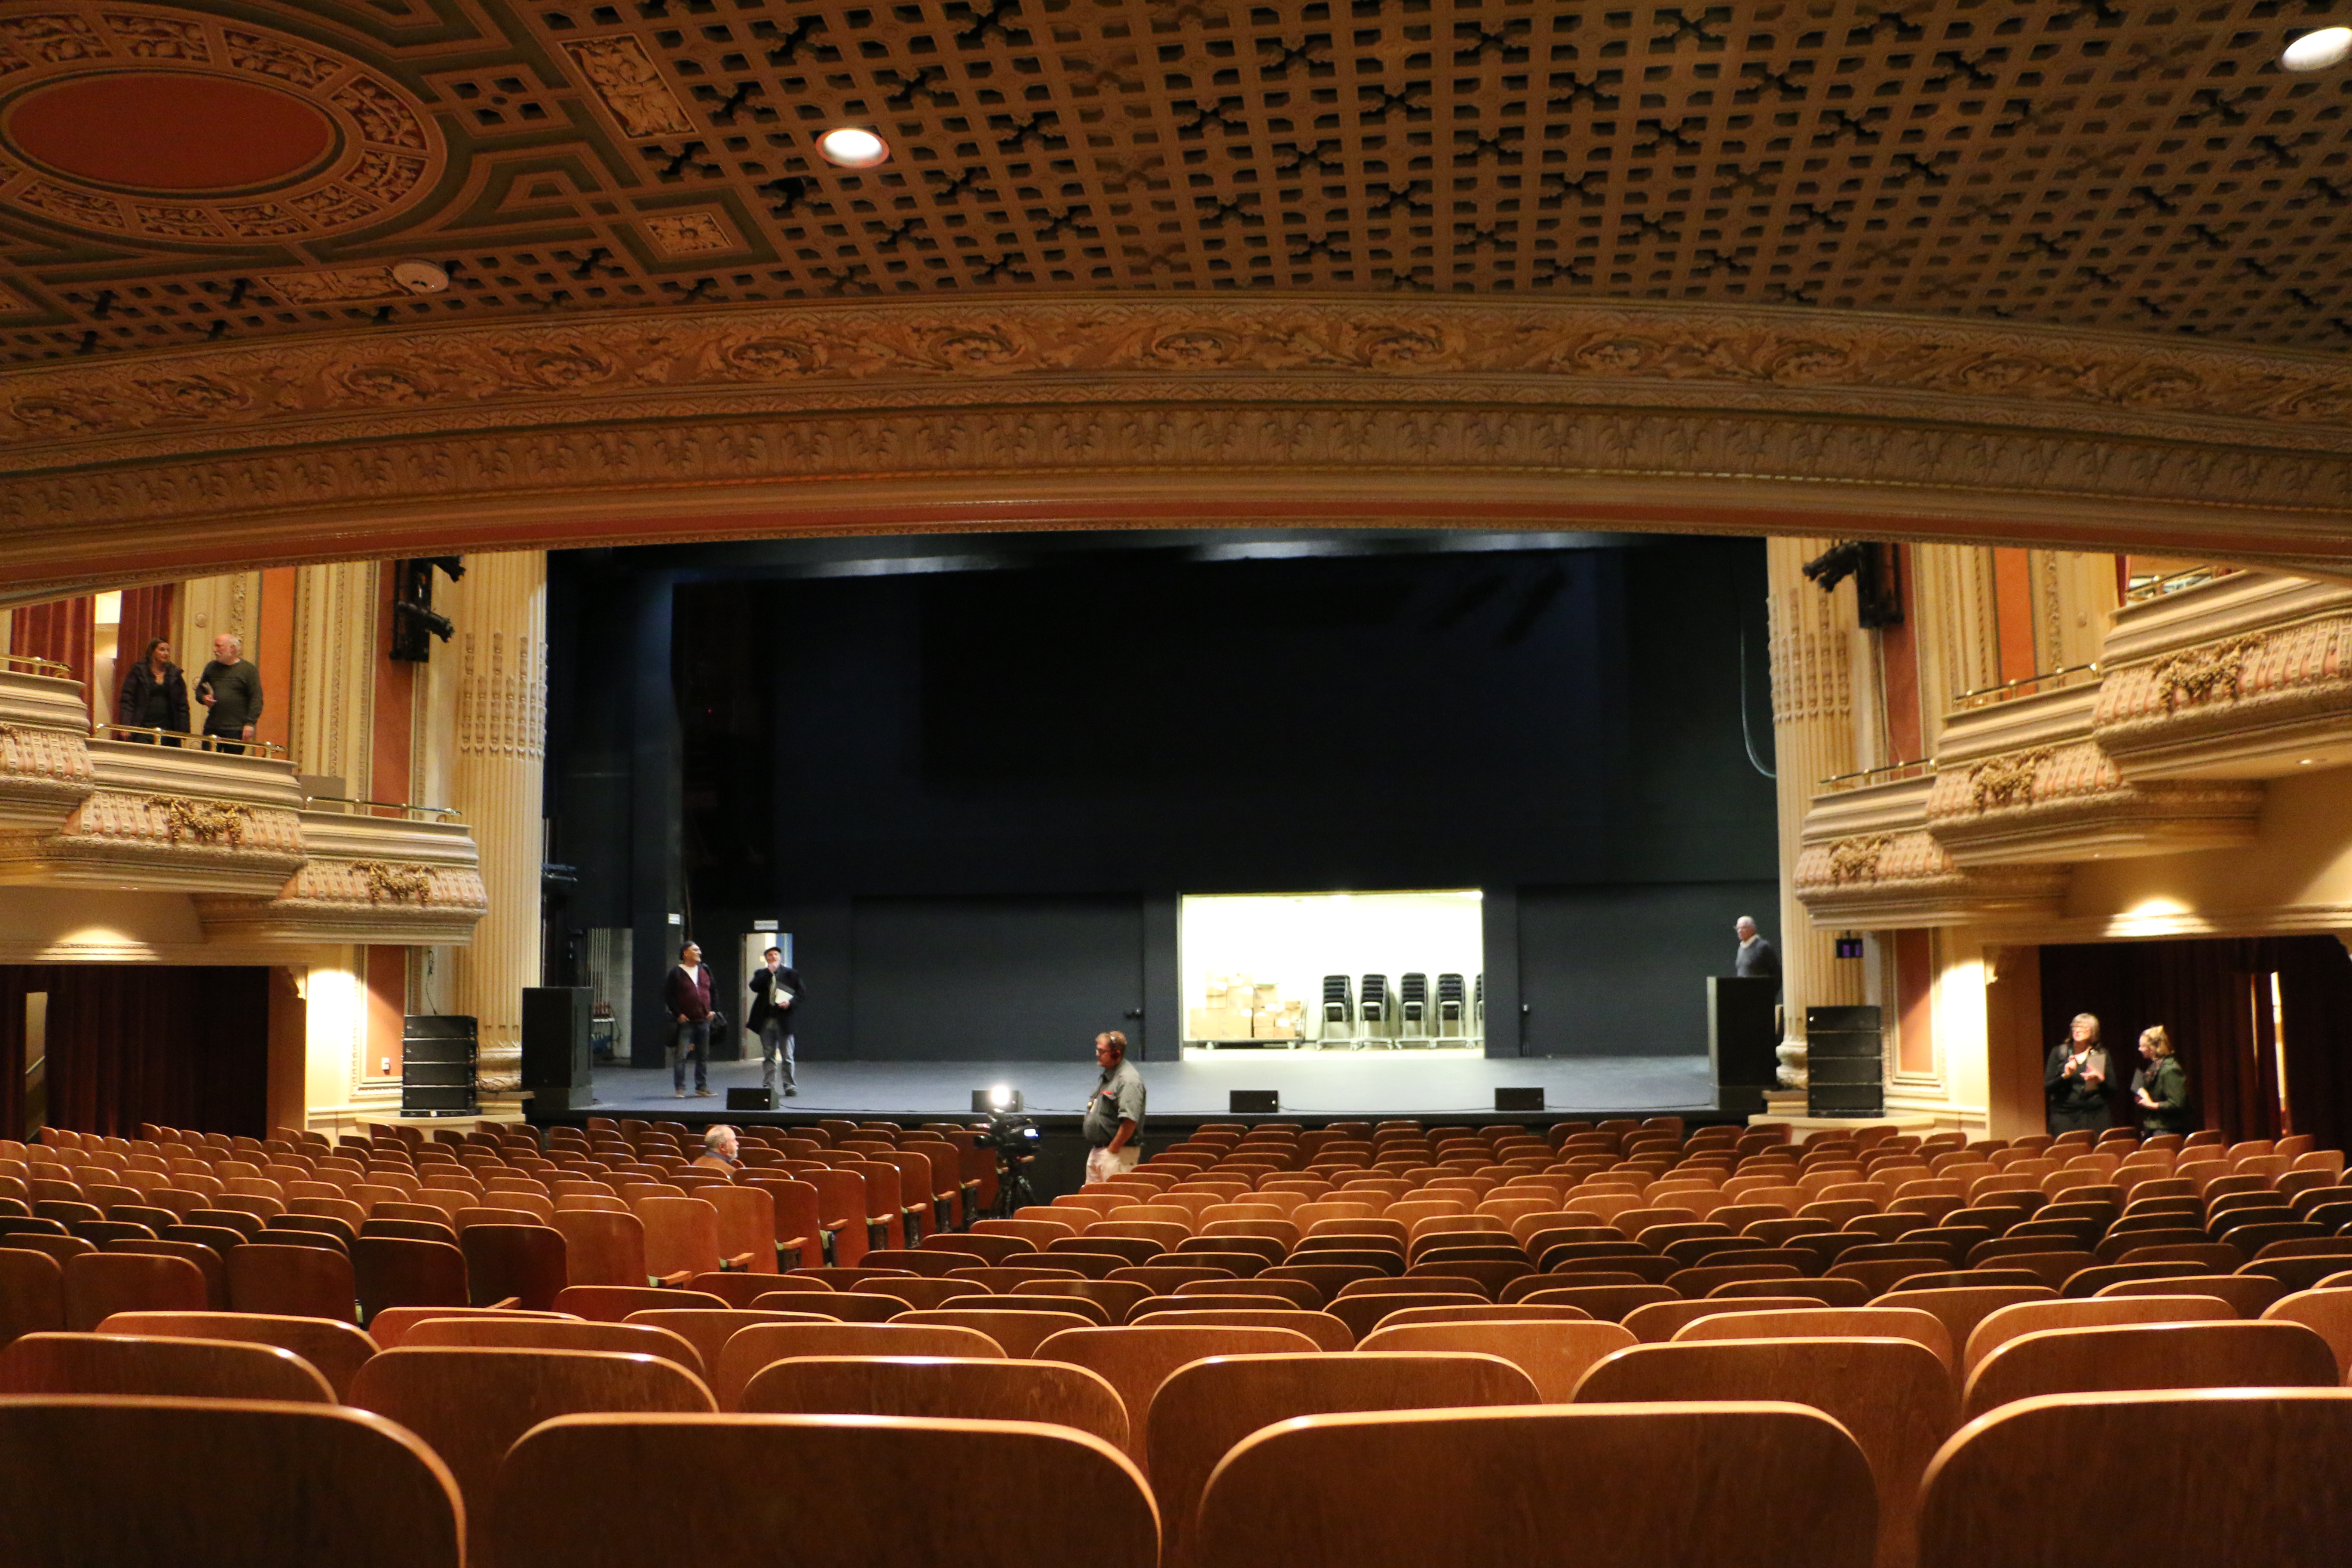 The guest view at the newly renovated Pantages Theater in Tacoma Washington